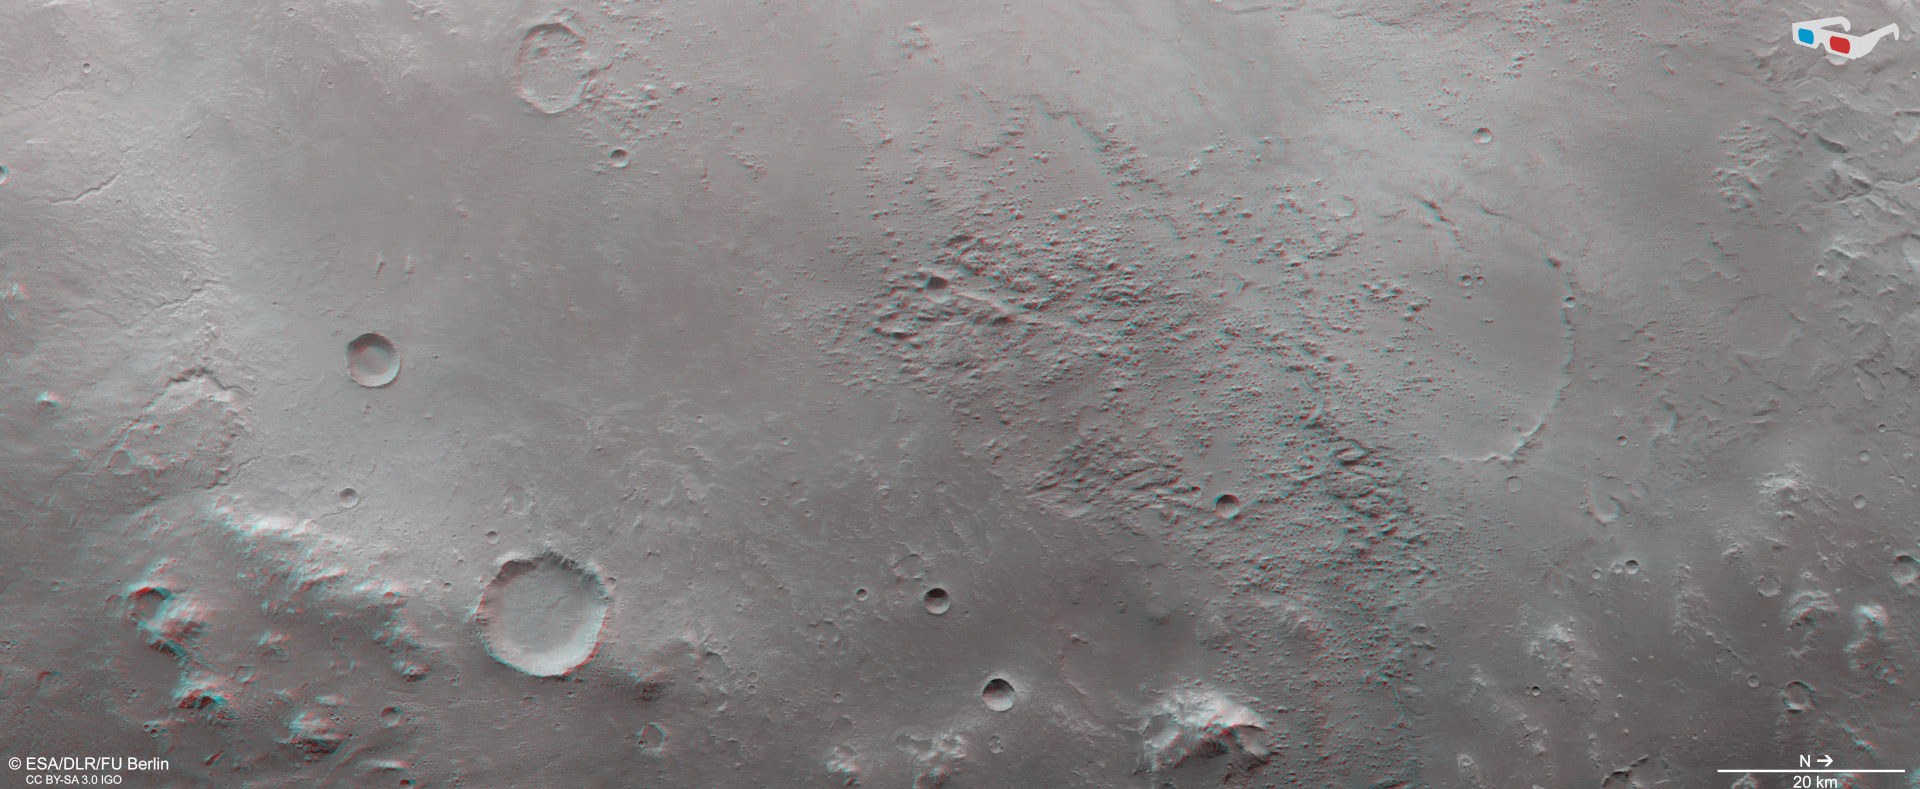 Anaglyph image of the 'Holden Basin'